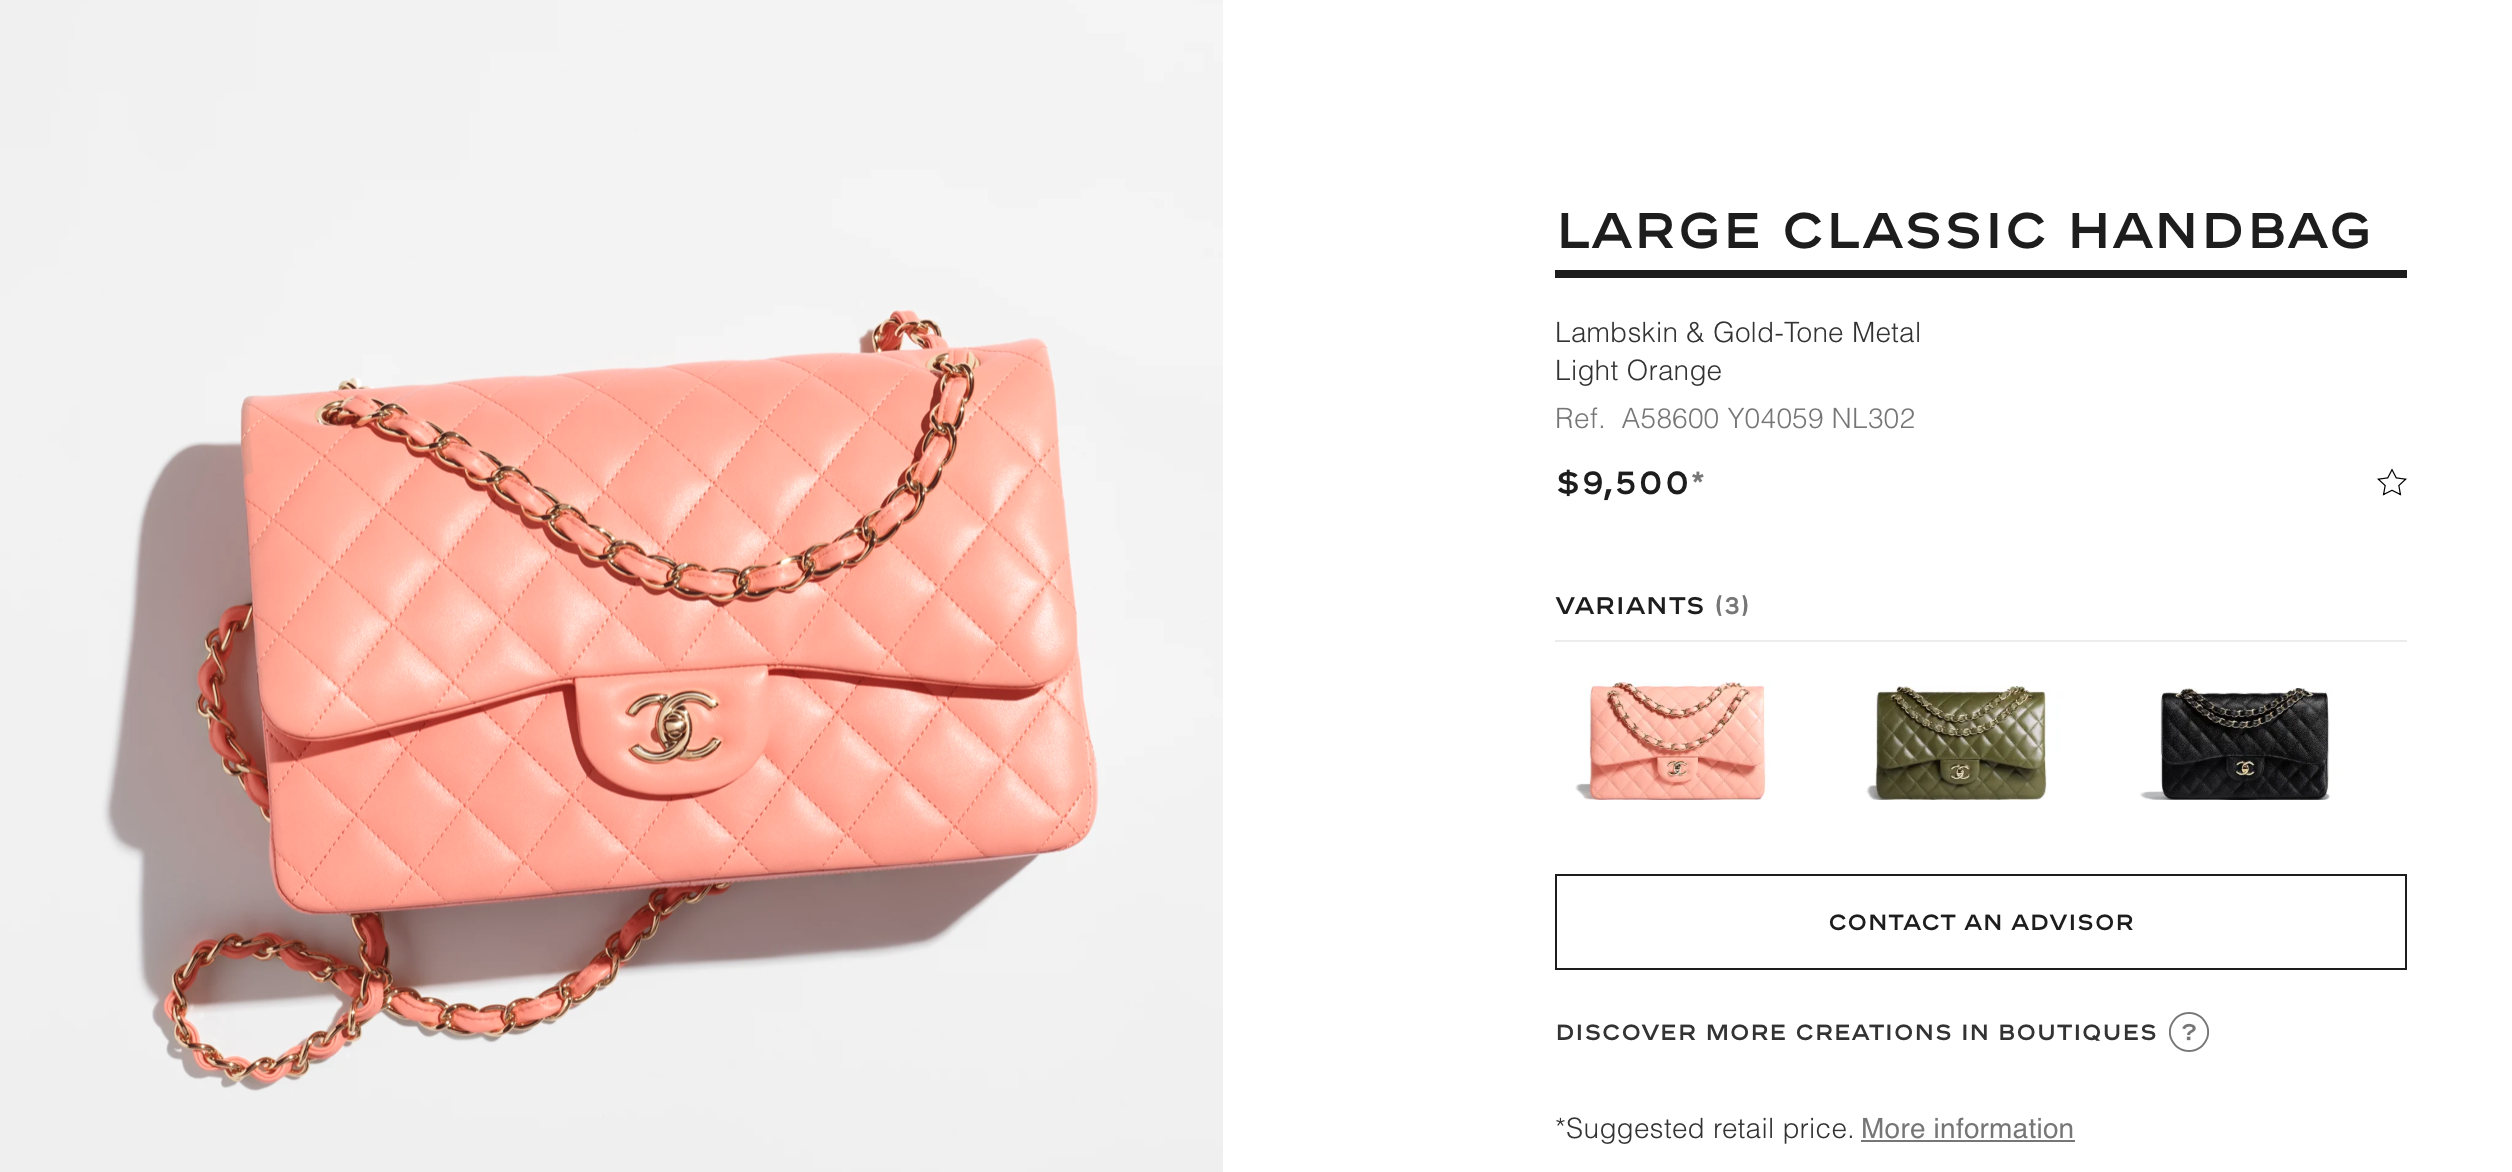 chanel classic flap bag how much